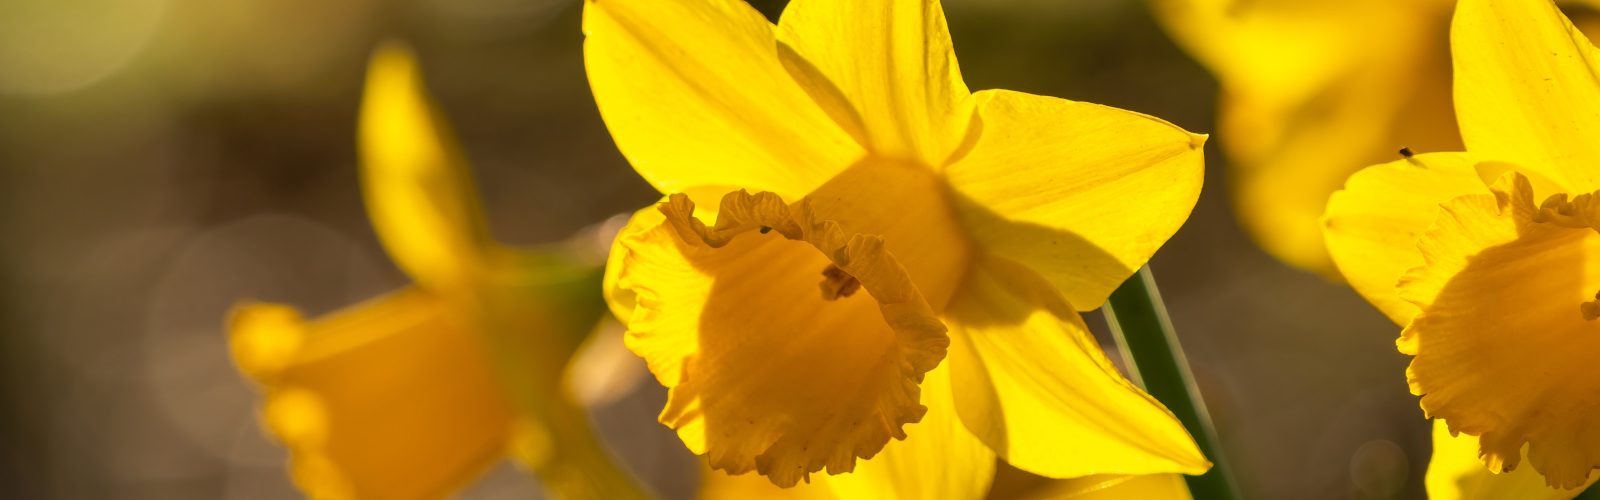 Bright yellow daffodils growing in spring